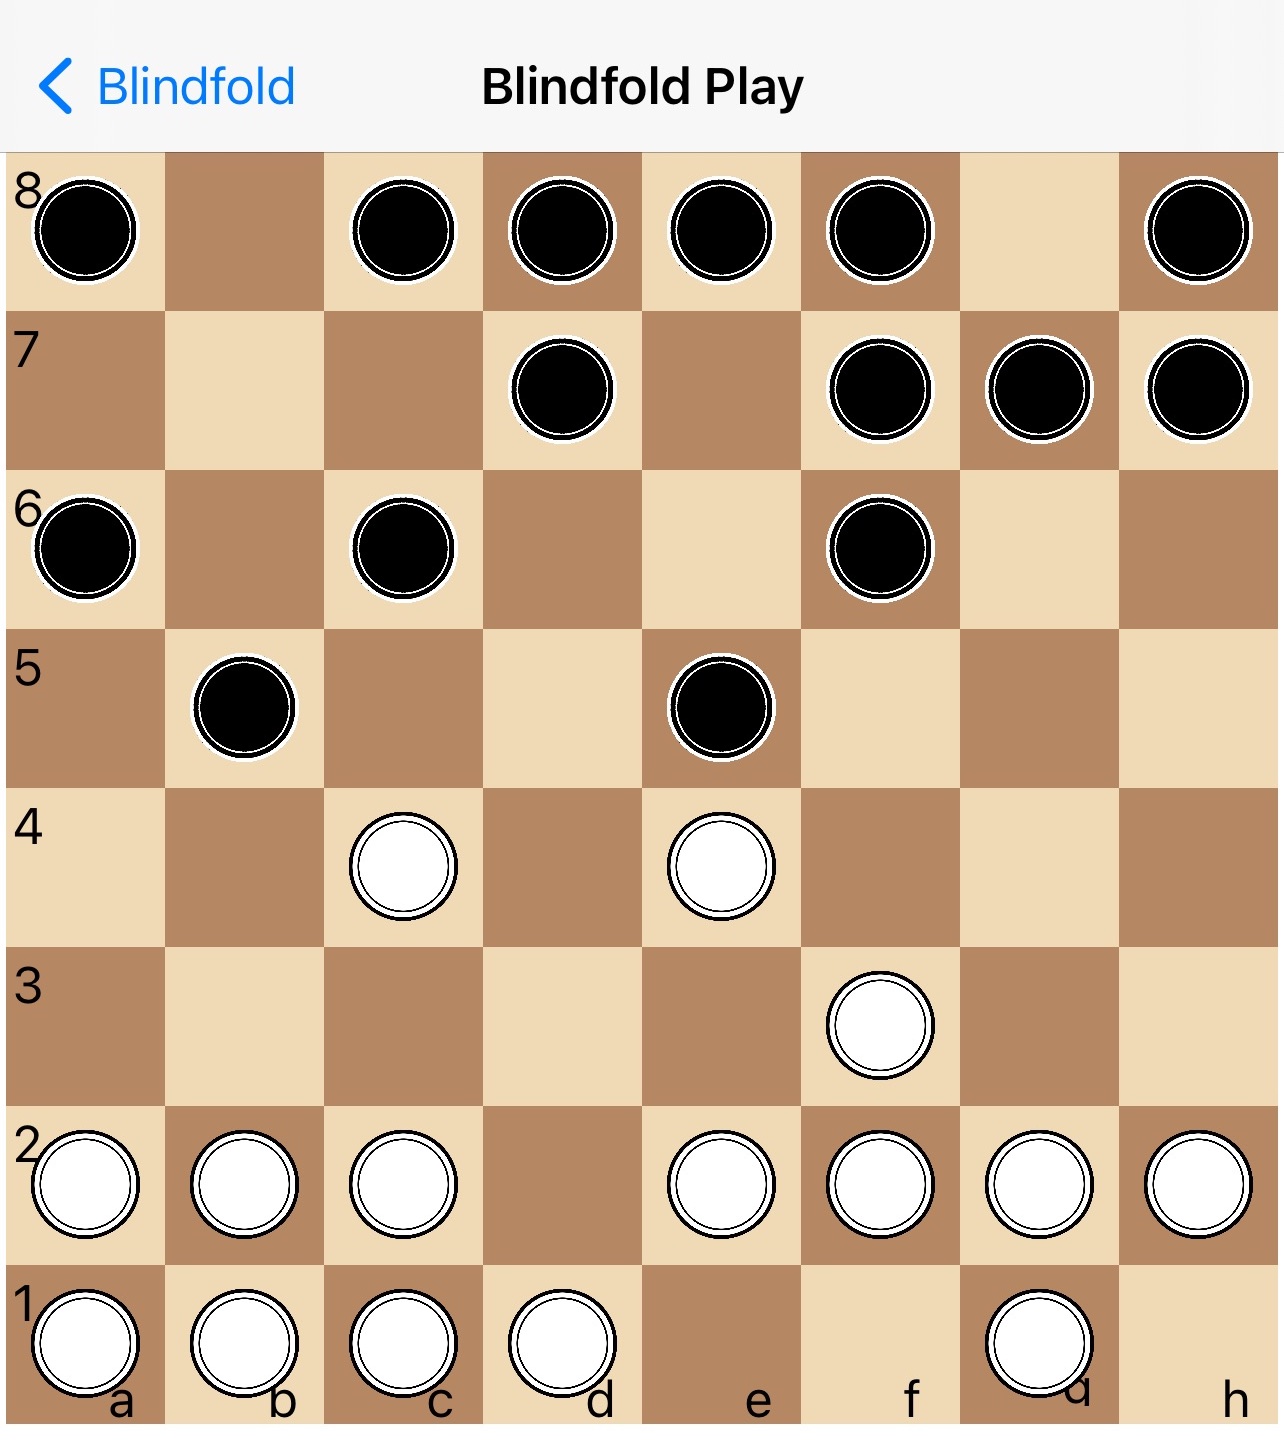 learning - Can playing blindfold chess be learned or is it a